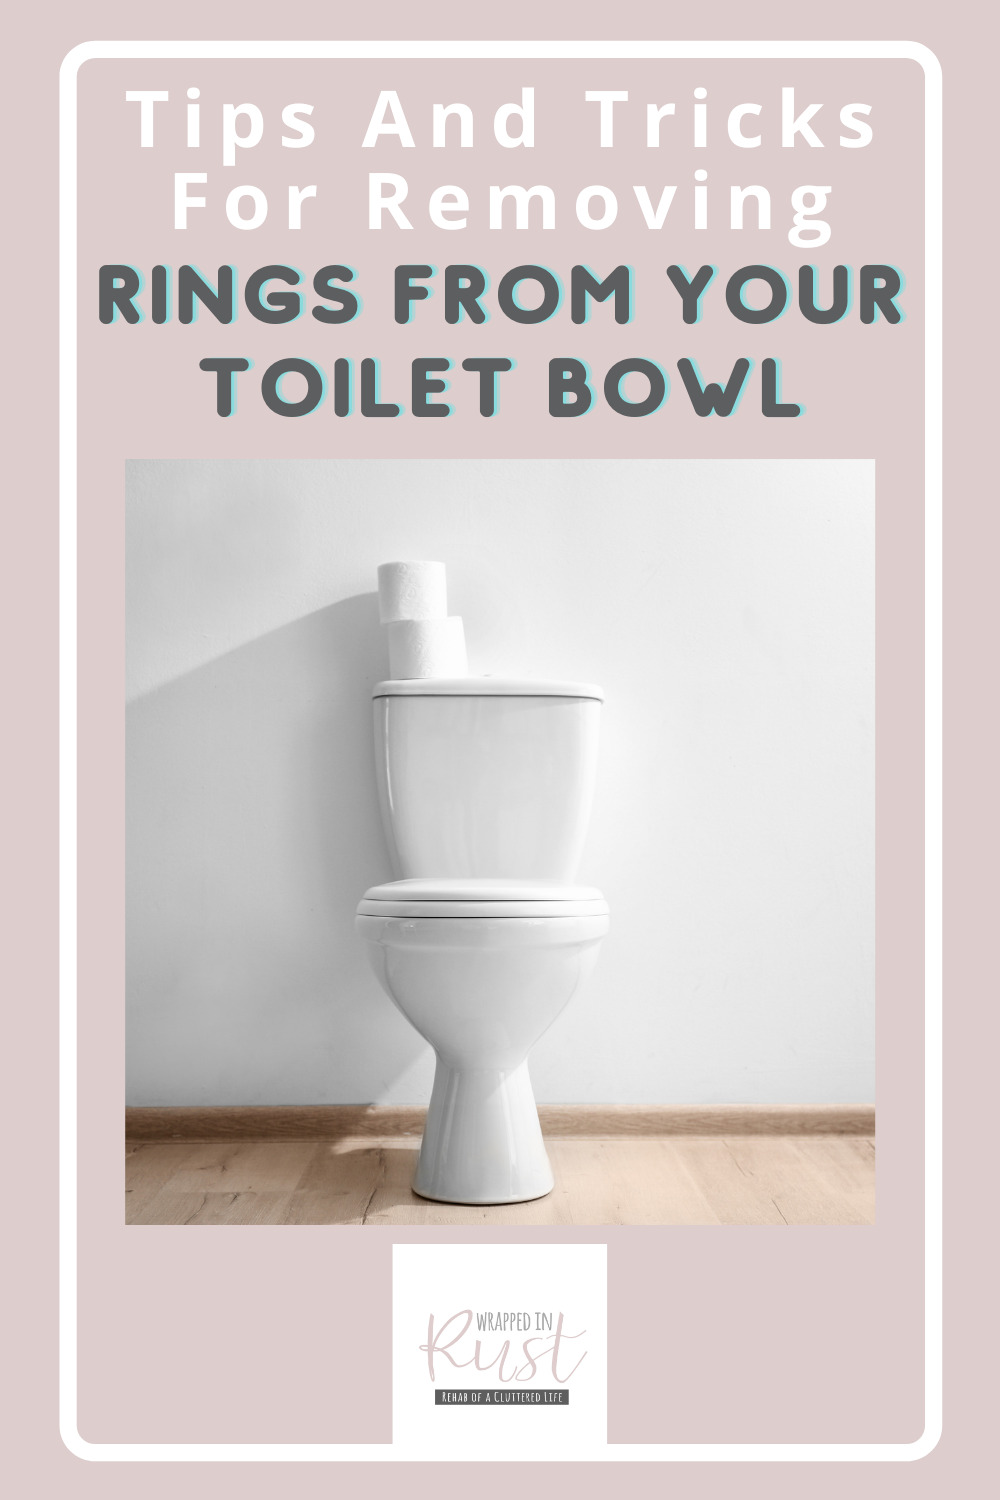 Wrappedinrust.com is filled full of genius cleaning ideas for all of your toughest messes and stains. Get ready for a big cleaning job! Find out the easiest ways to get rid of hard-to-remove toilet bowl rings!